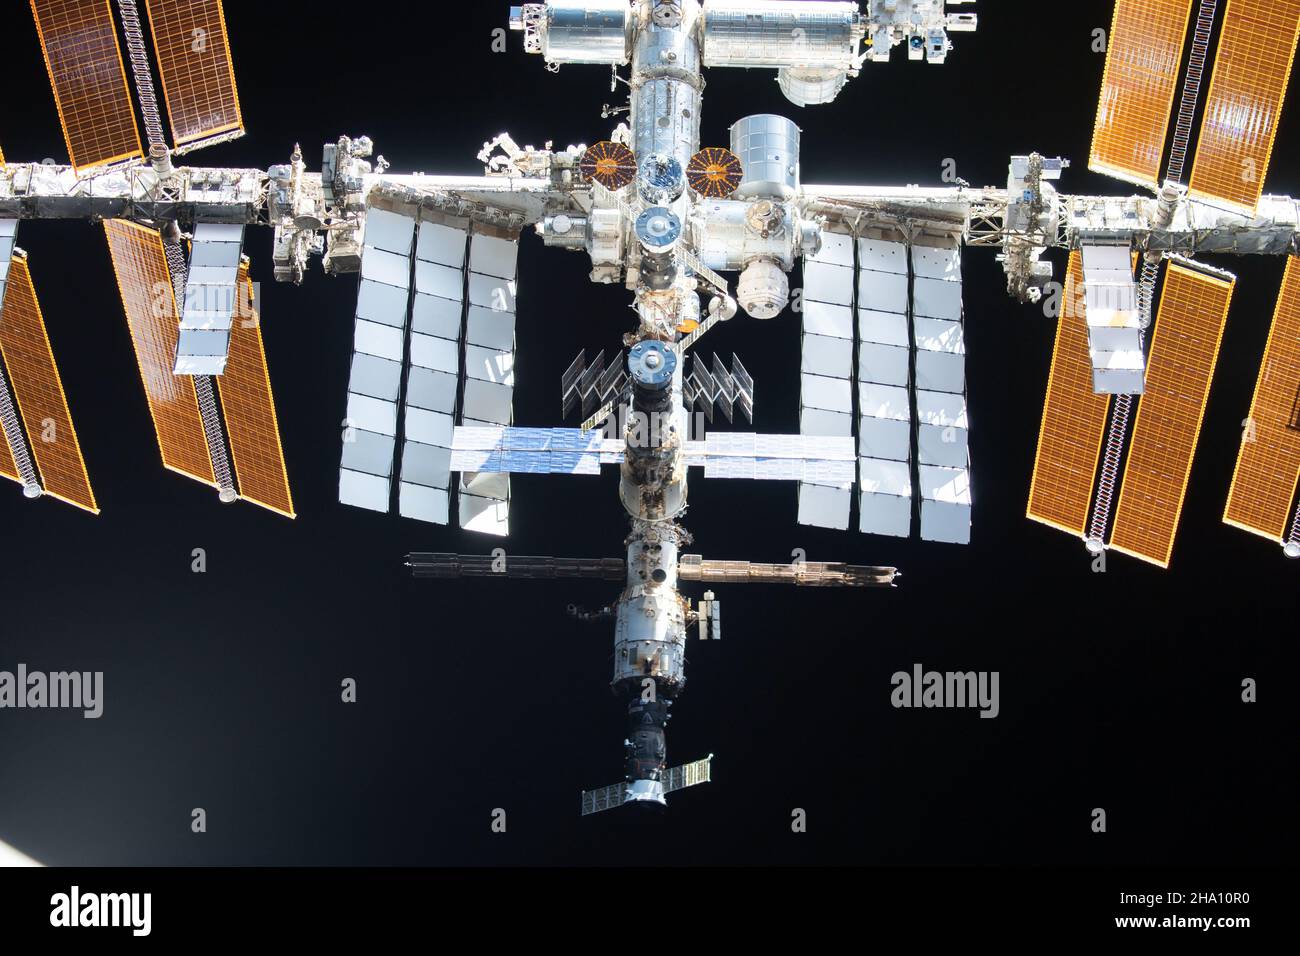 International Space Station, Earth Orbit. 08 November, 2021. The International Space Station seen from the SpaceX Crew Dragon Endeavour spacecraft during a fly-around of the orbiting lab after undocking from the Harmony module space-facing port November 8, 2021 in Earth Orbit. Credit: NASA/NASA/Alamy Live News Stock Photo